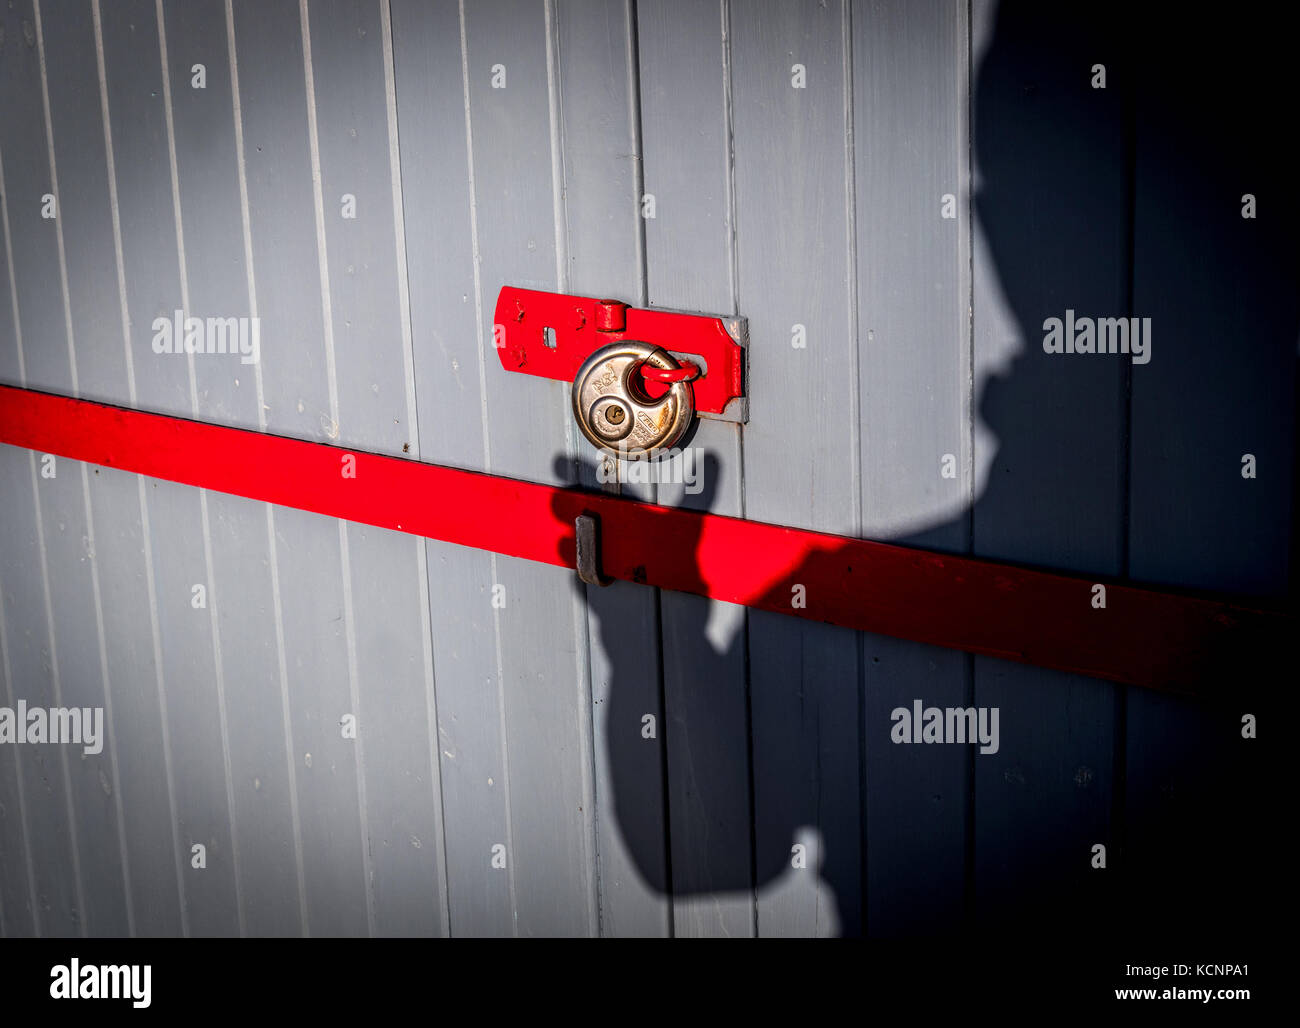 Shed theft concept image of a shadowy figure approaching a locked shed Stock Photo